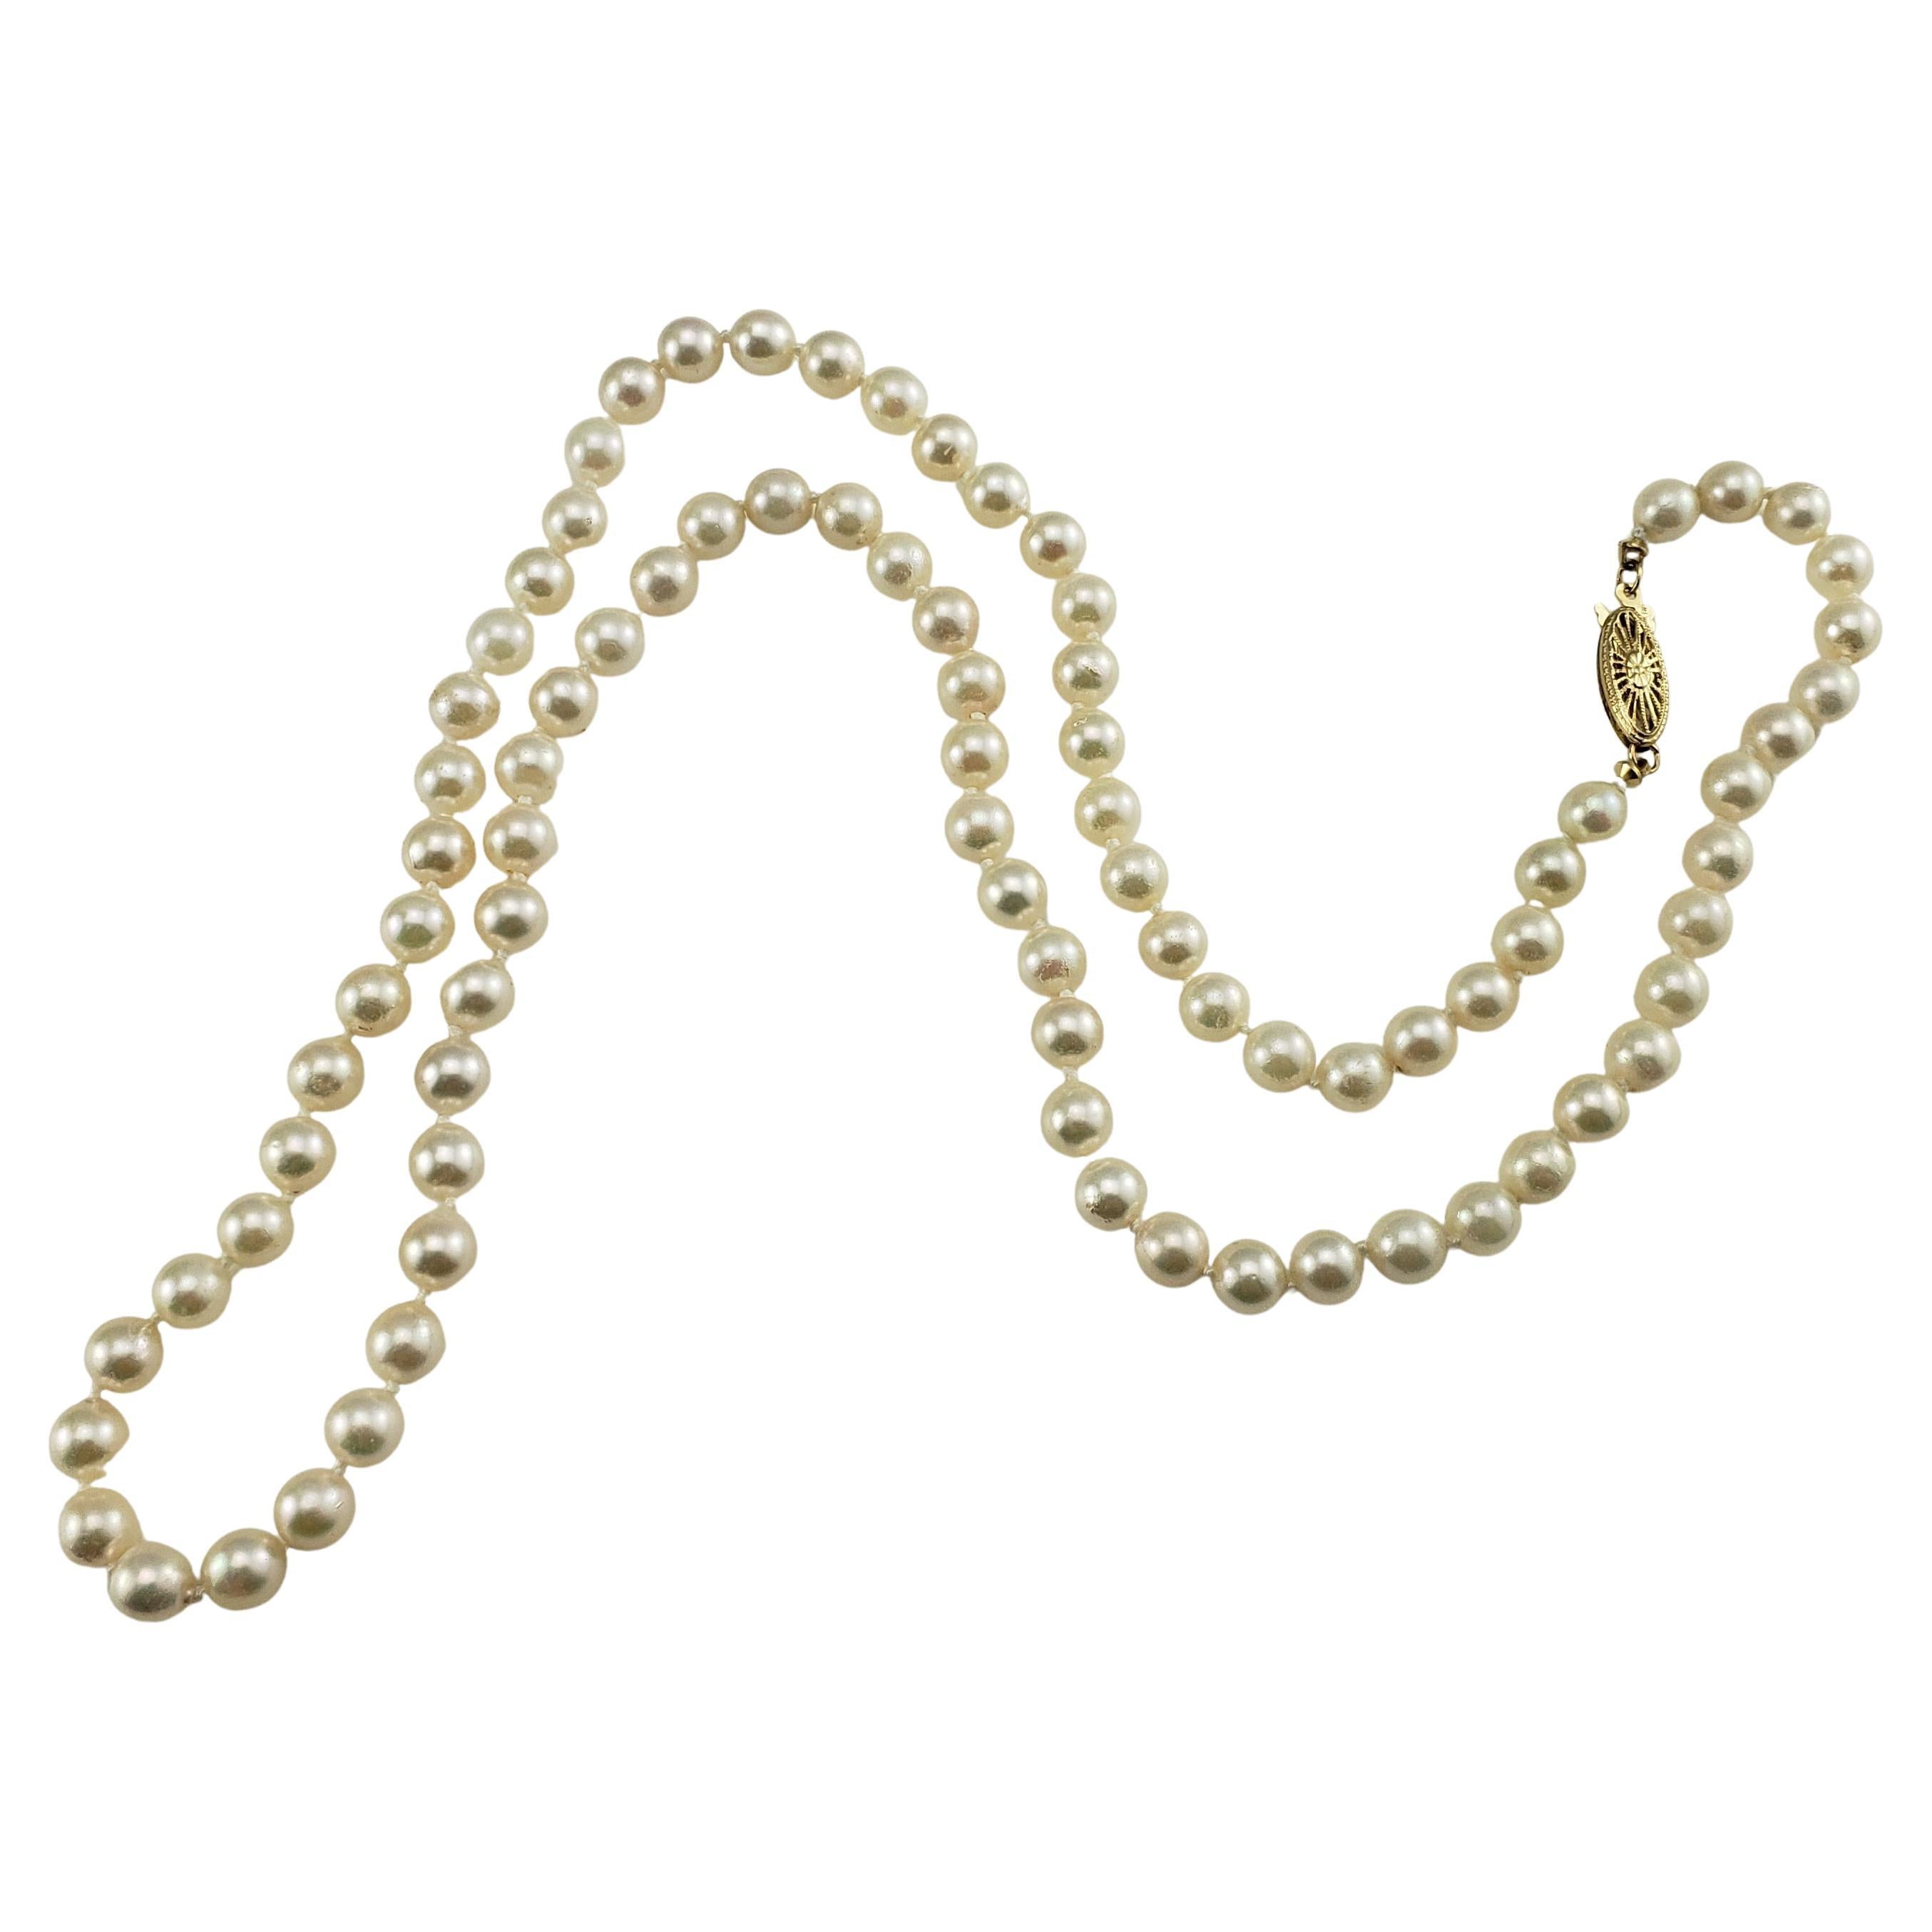 Vintage Cultured Pearl Necklace with 14 Karat Yellow Gold Closure